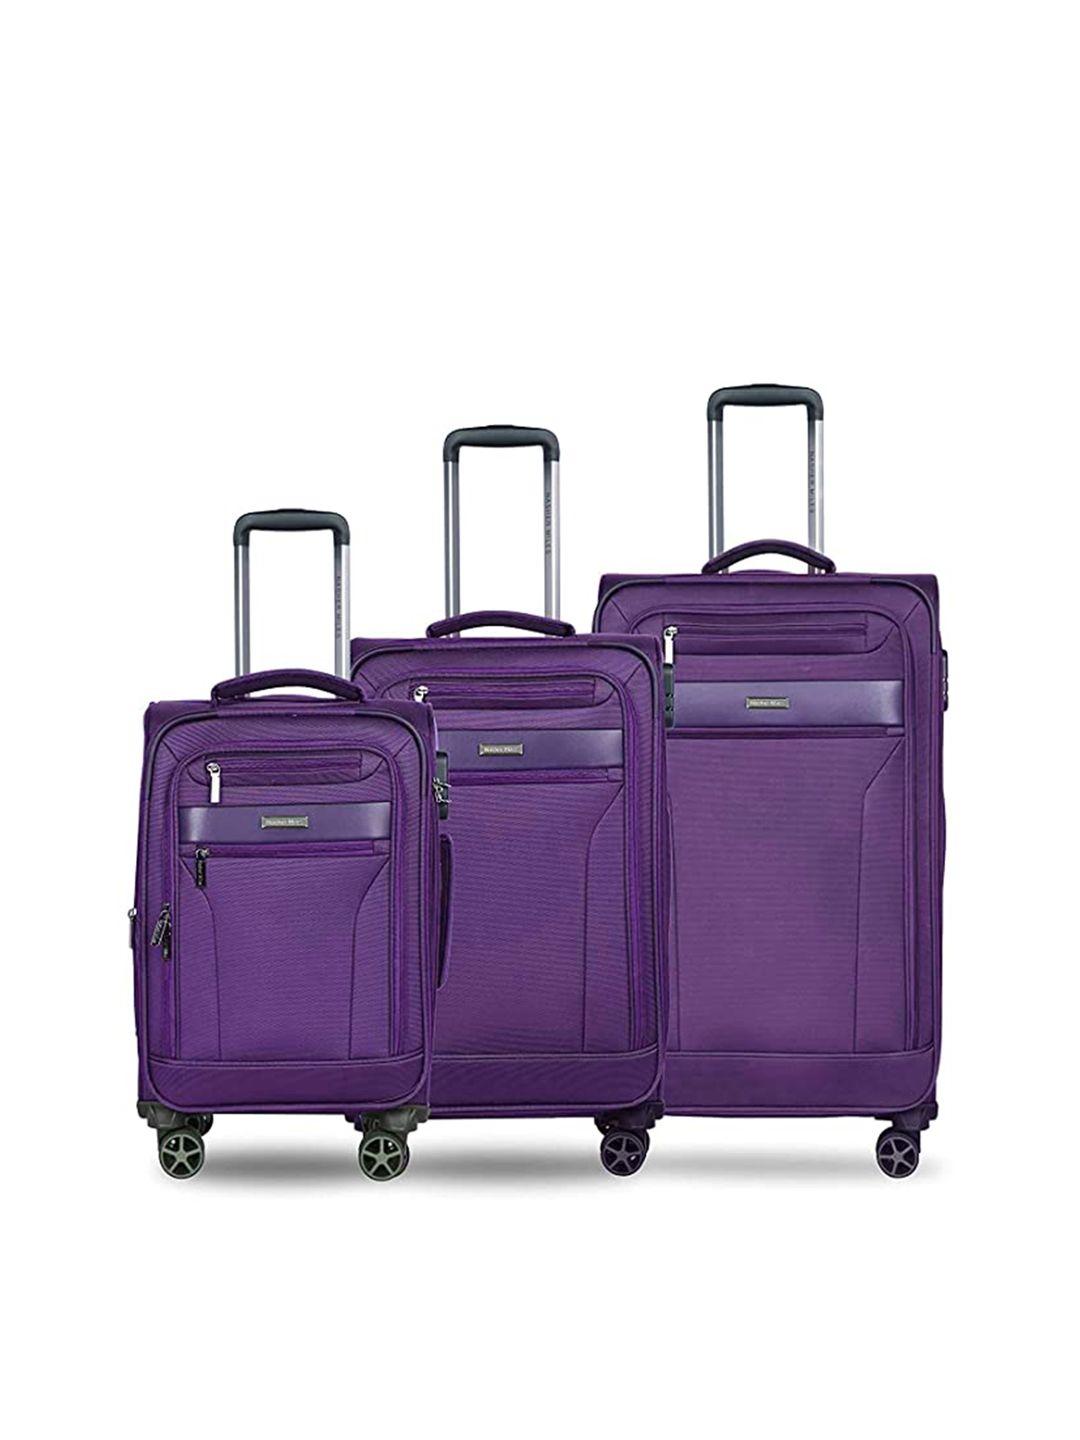 nasher miles nasher miles set of 3 soft sided trolley suitcase